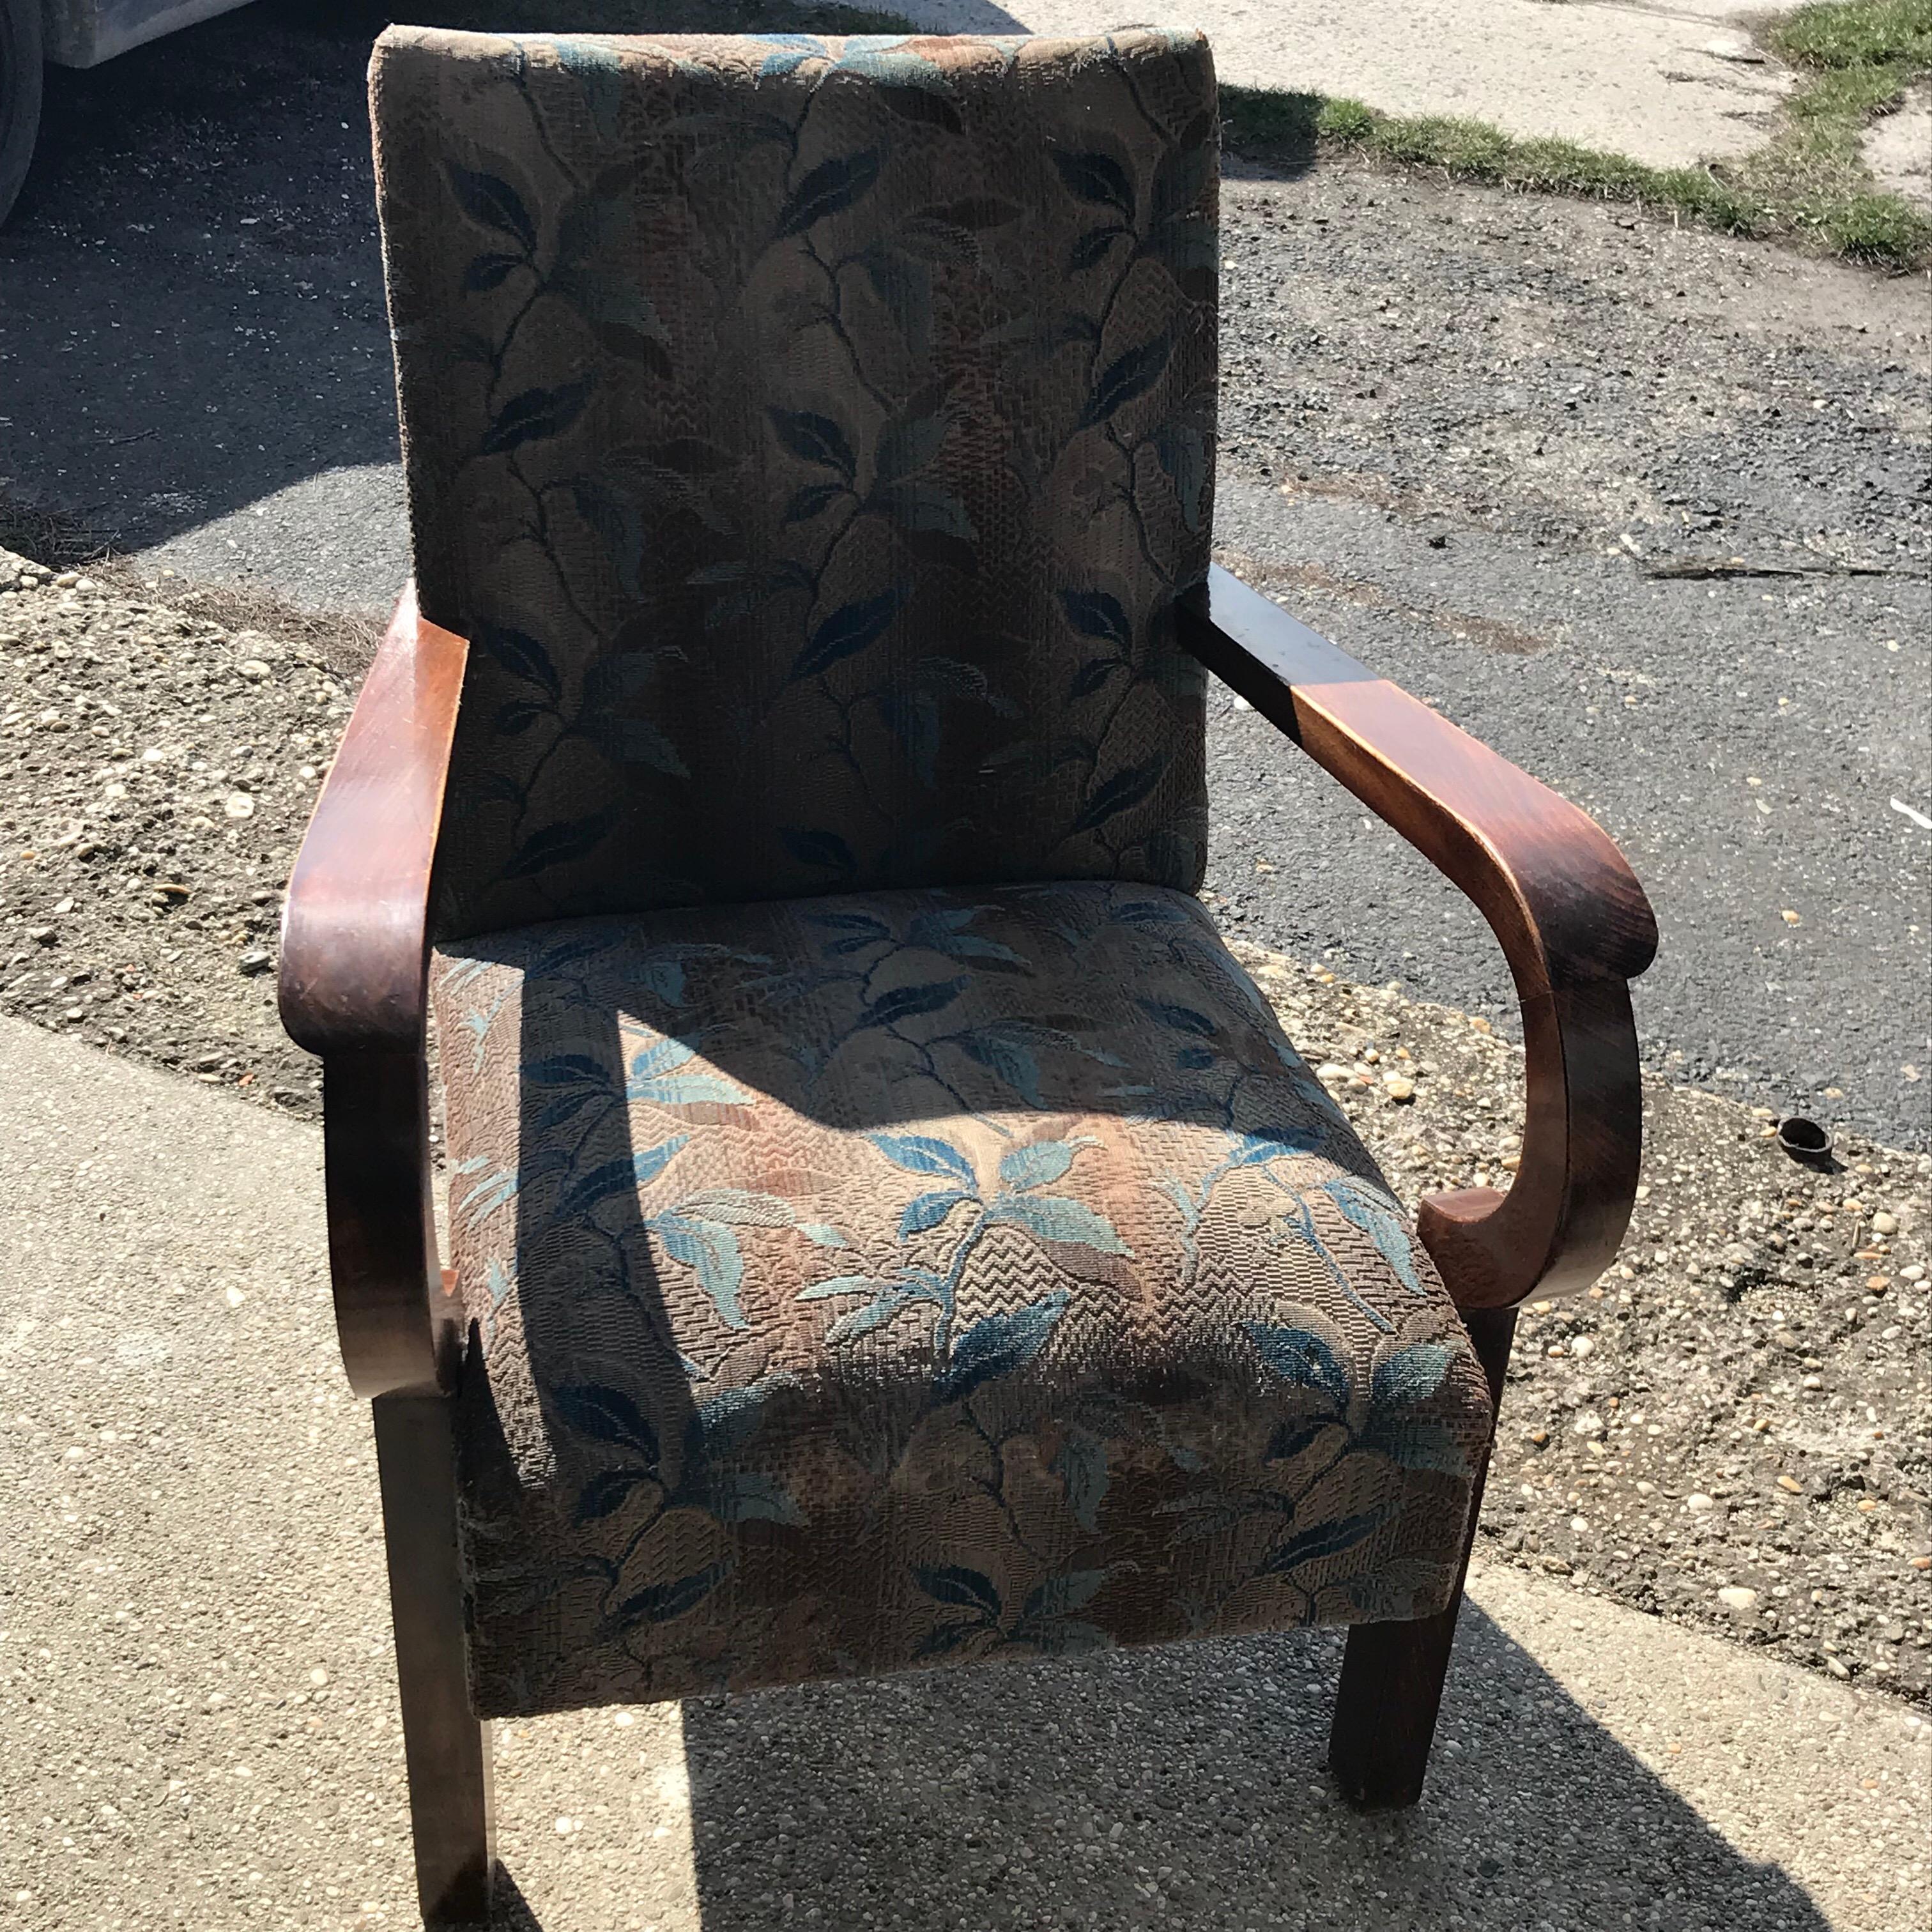 Art Deco chairs is from Budapest /2 st
Is made from solid walnut. Original good condition.
Original fabric.